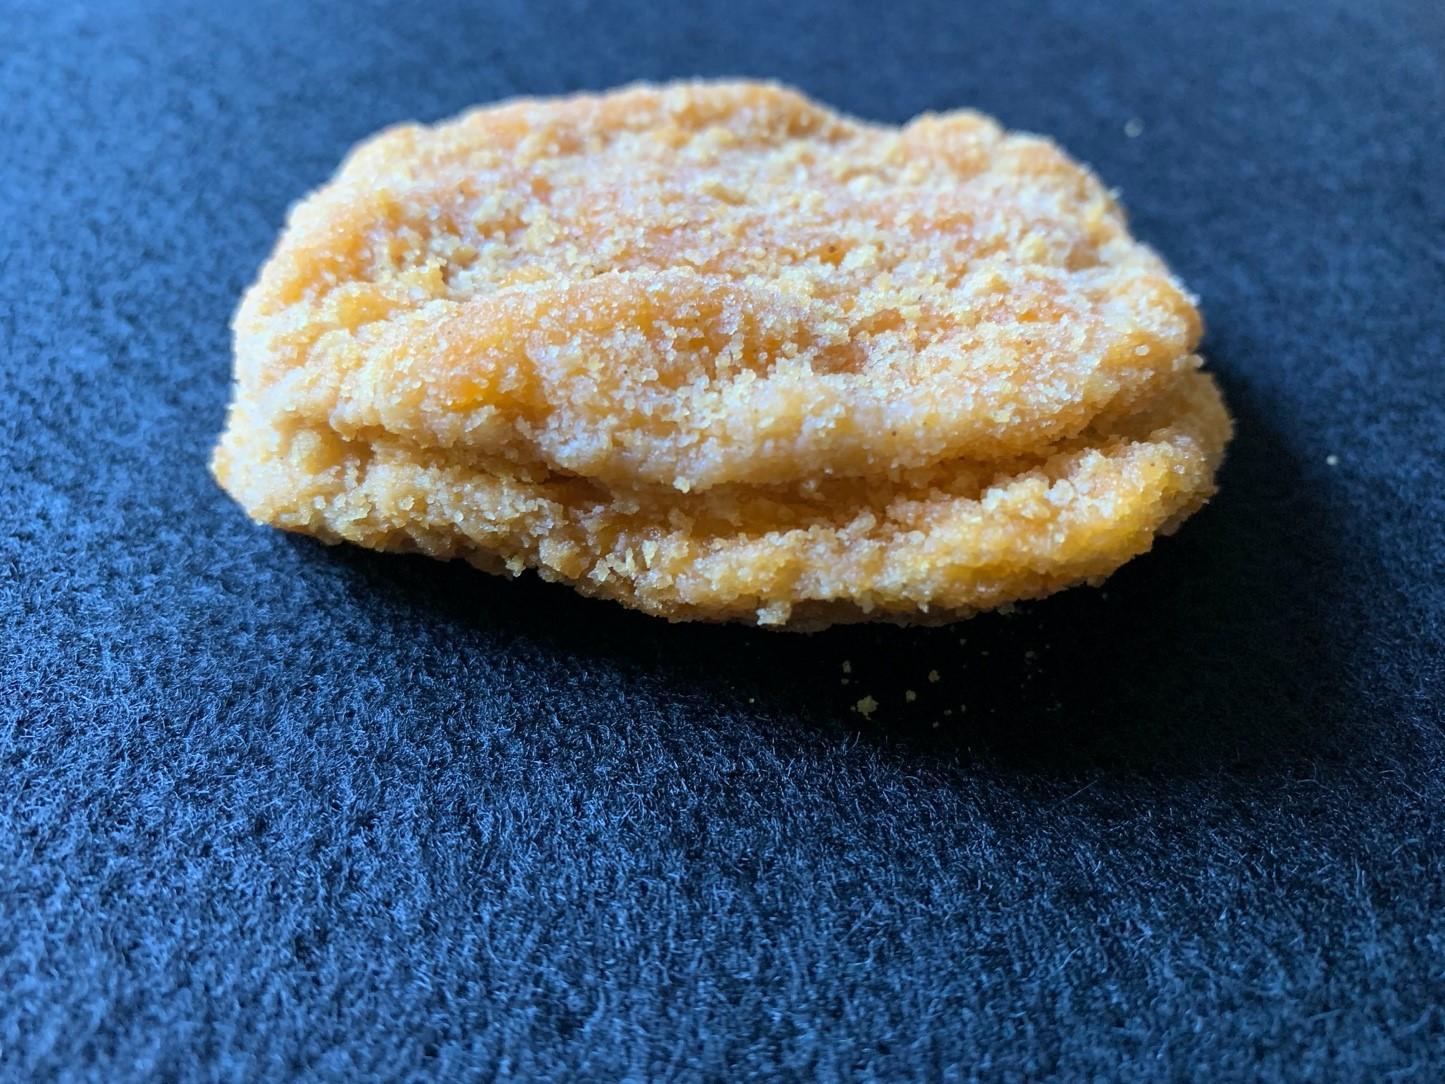 Figure 4 - Two chicken patties attached to each other